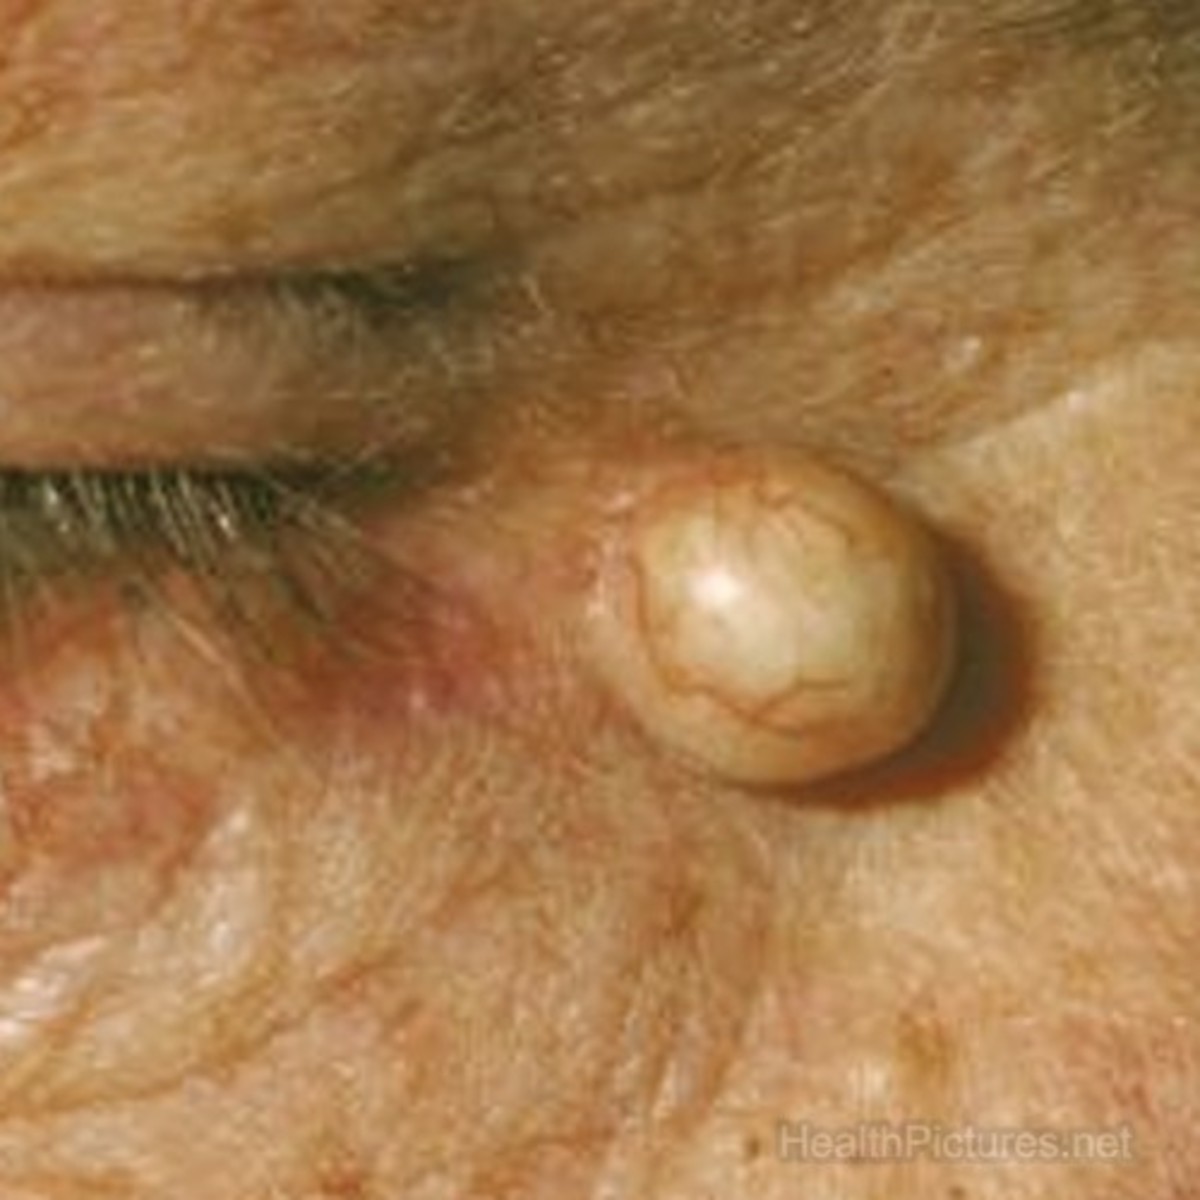 What is sebaceous prominence